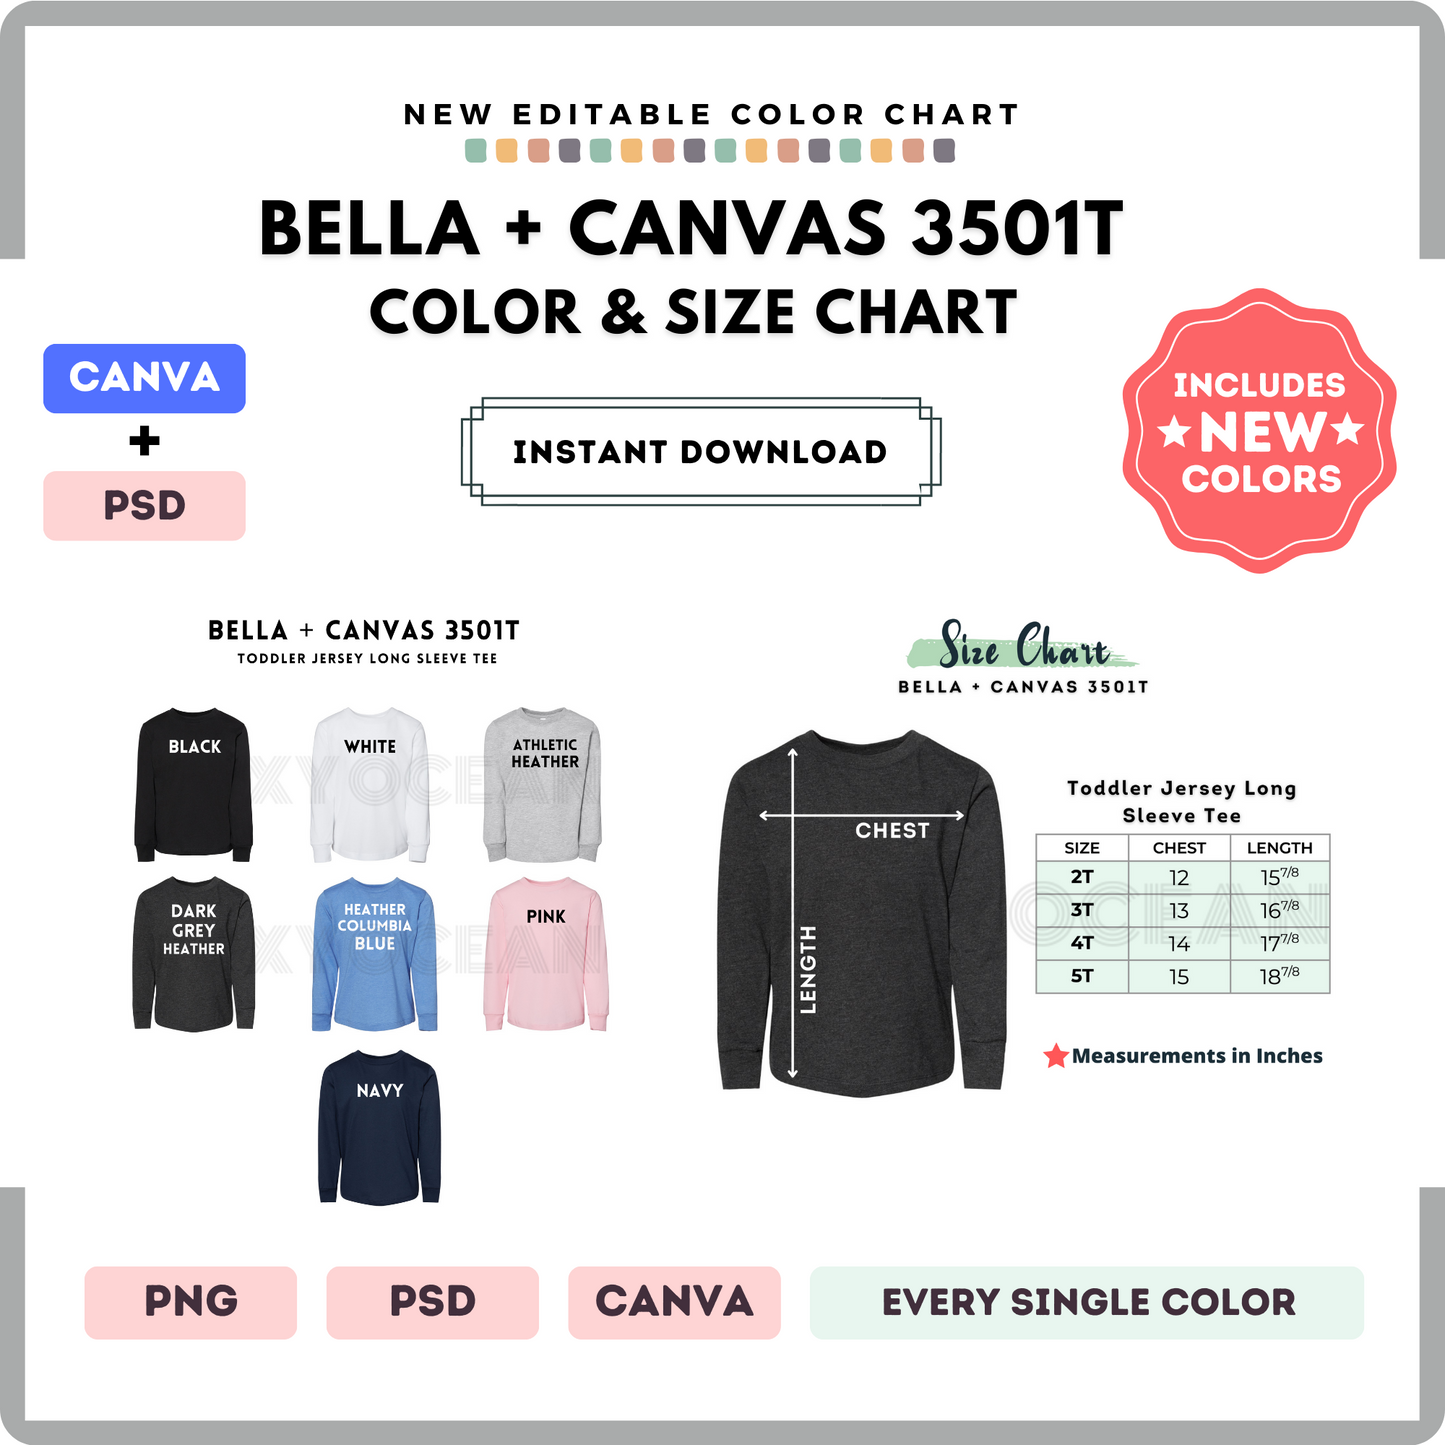 Bella Canvas 3501T Color and Size Chart